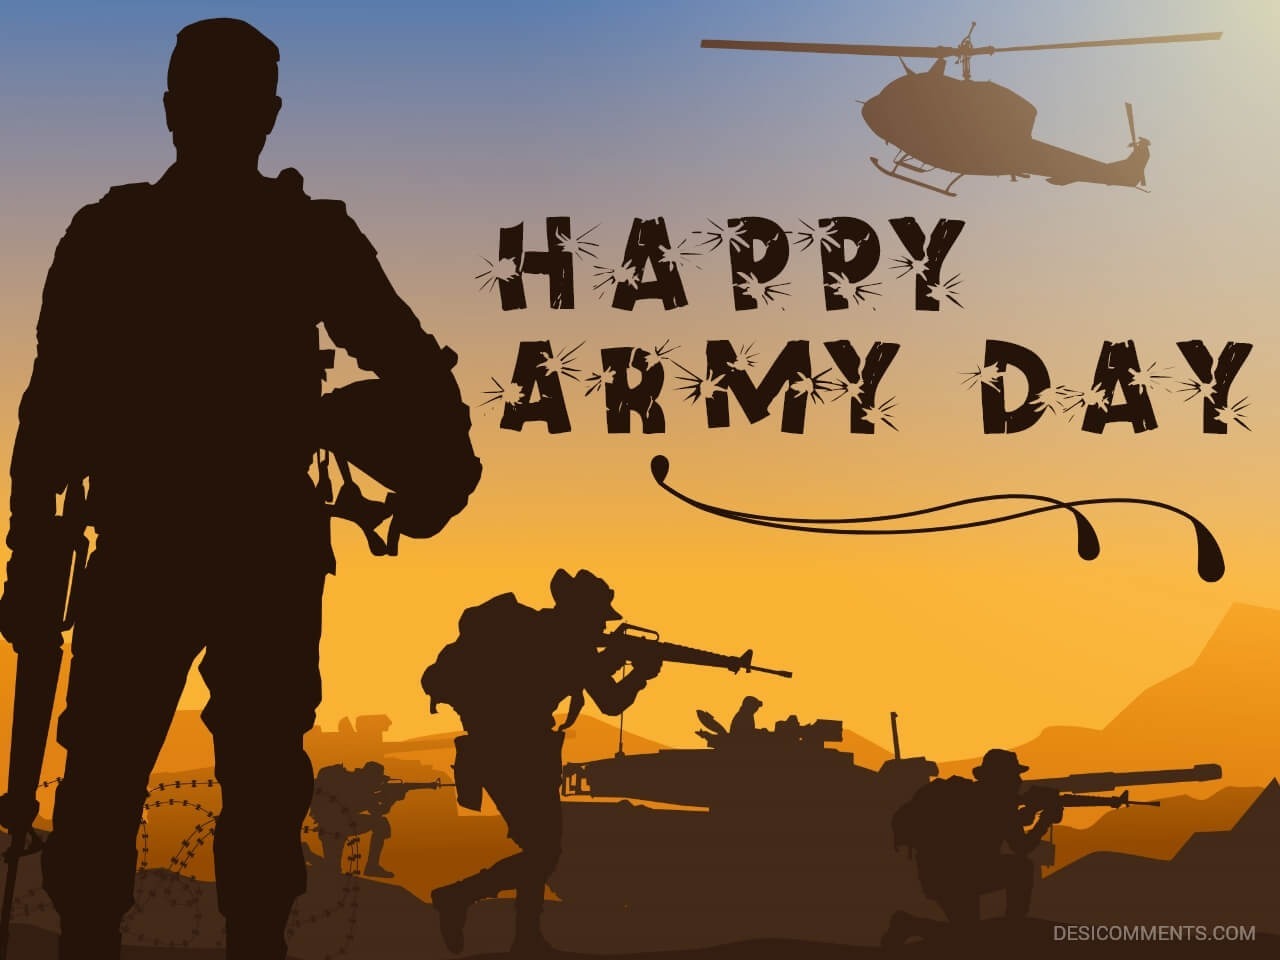 Happy Army Day Wallpaper - DesiComments.com